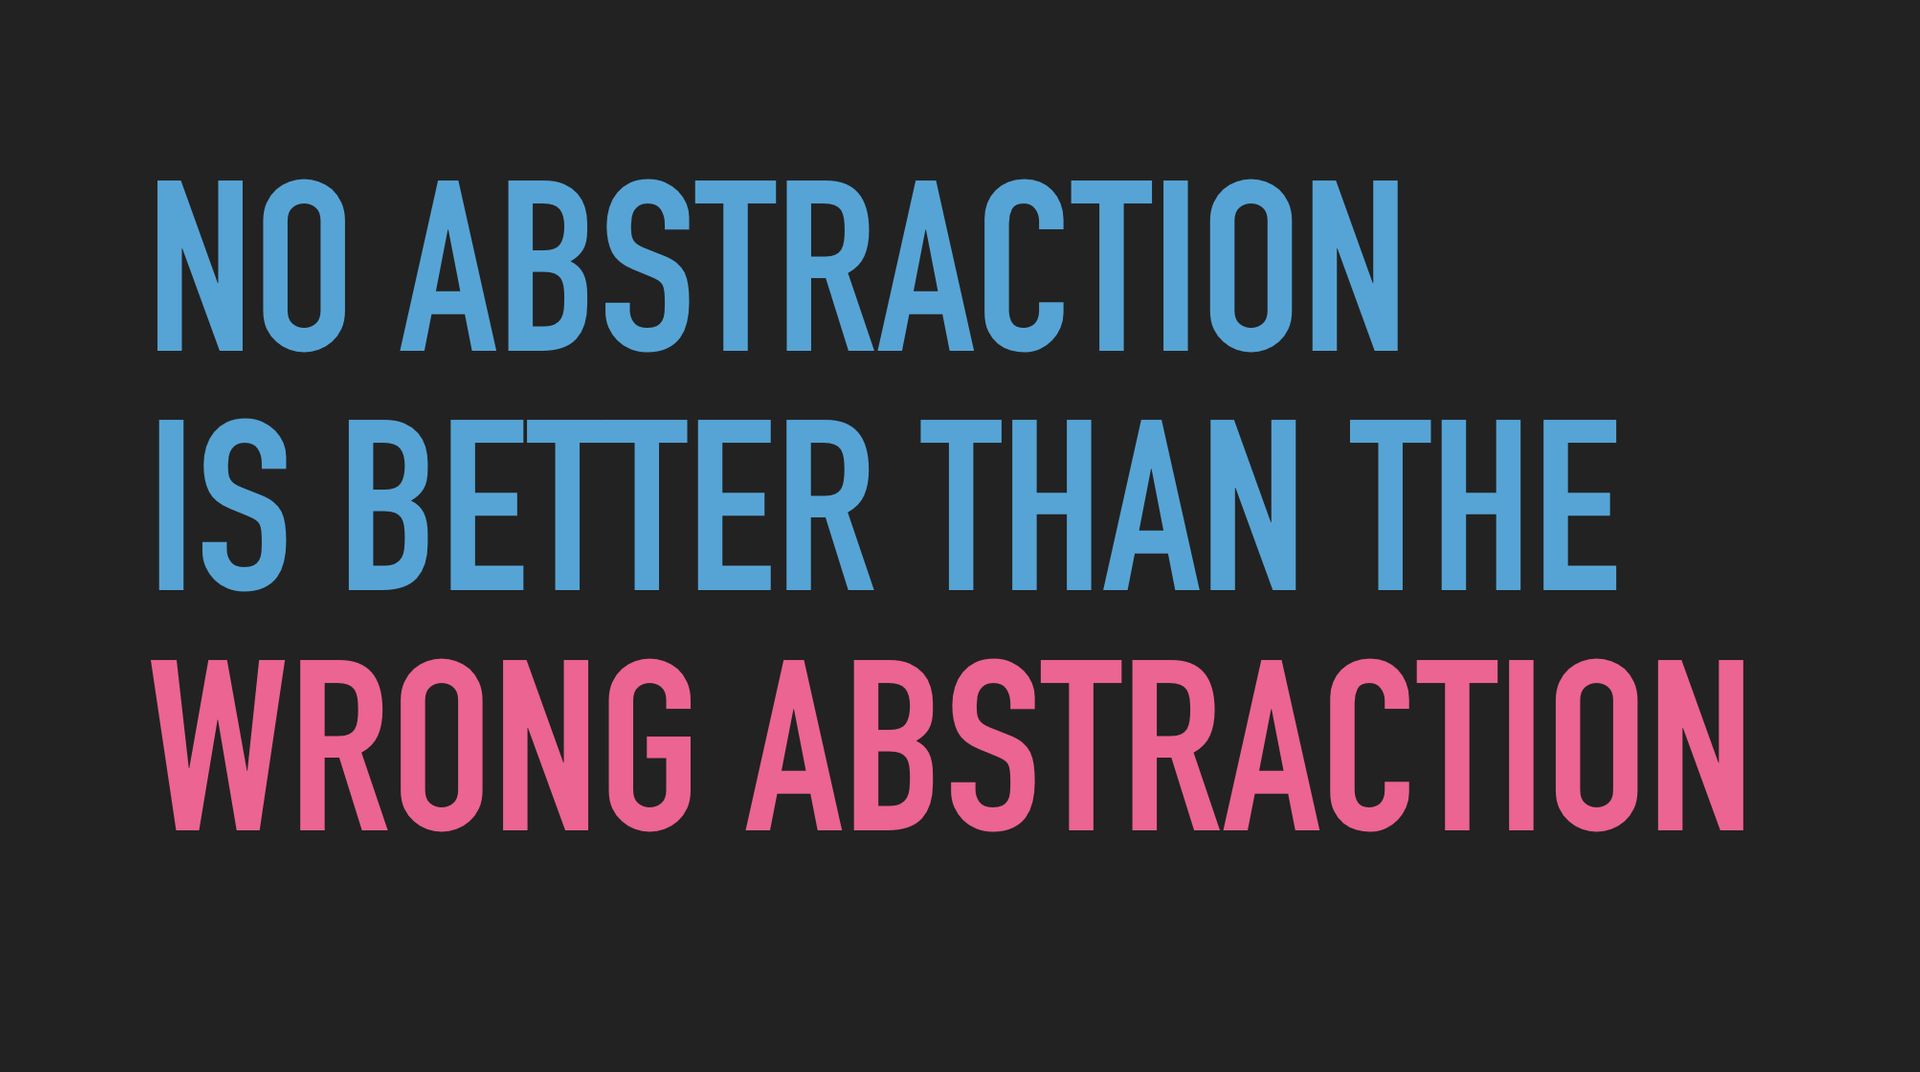 Slide text: No abstraction is better than the wrong abstraction.